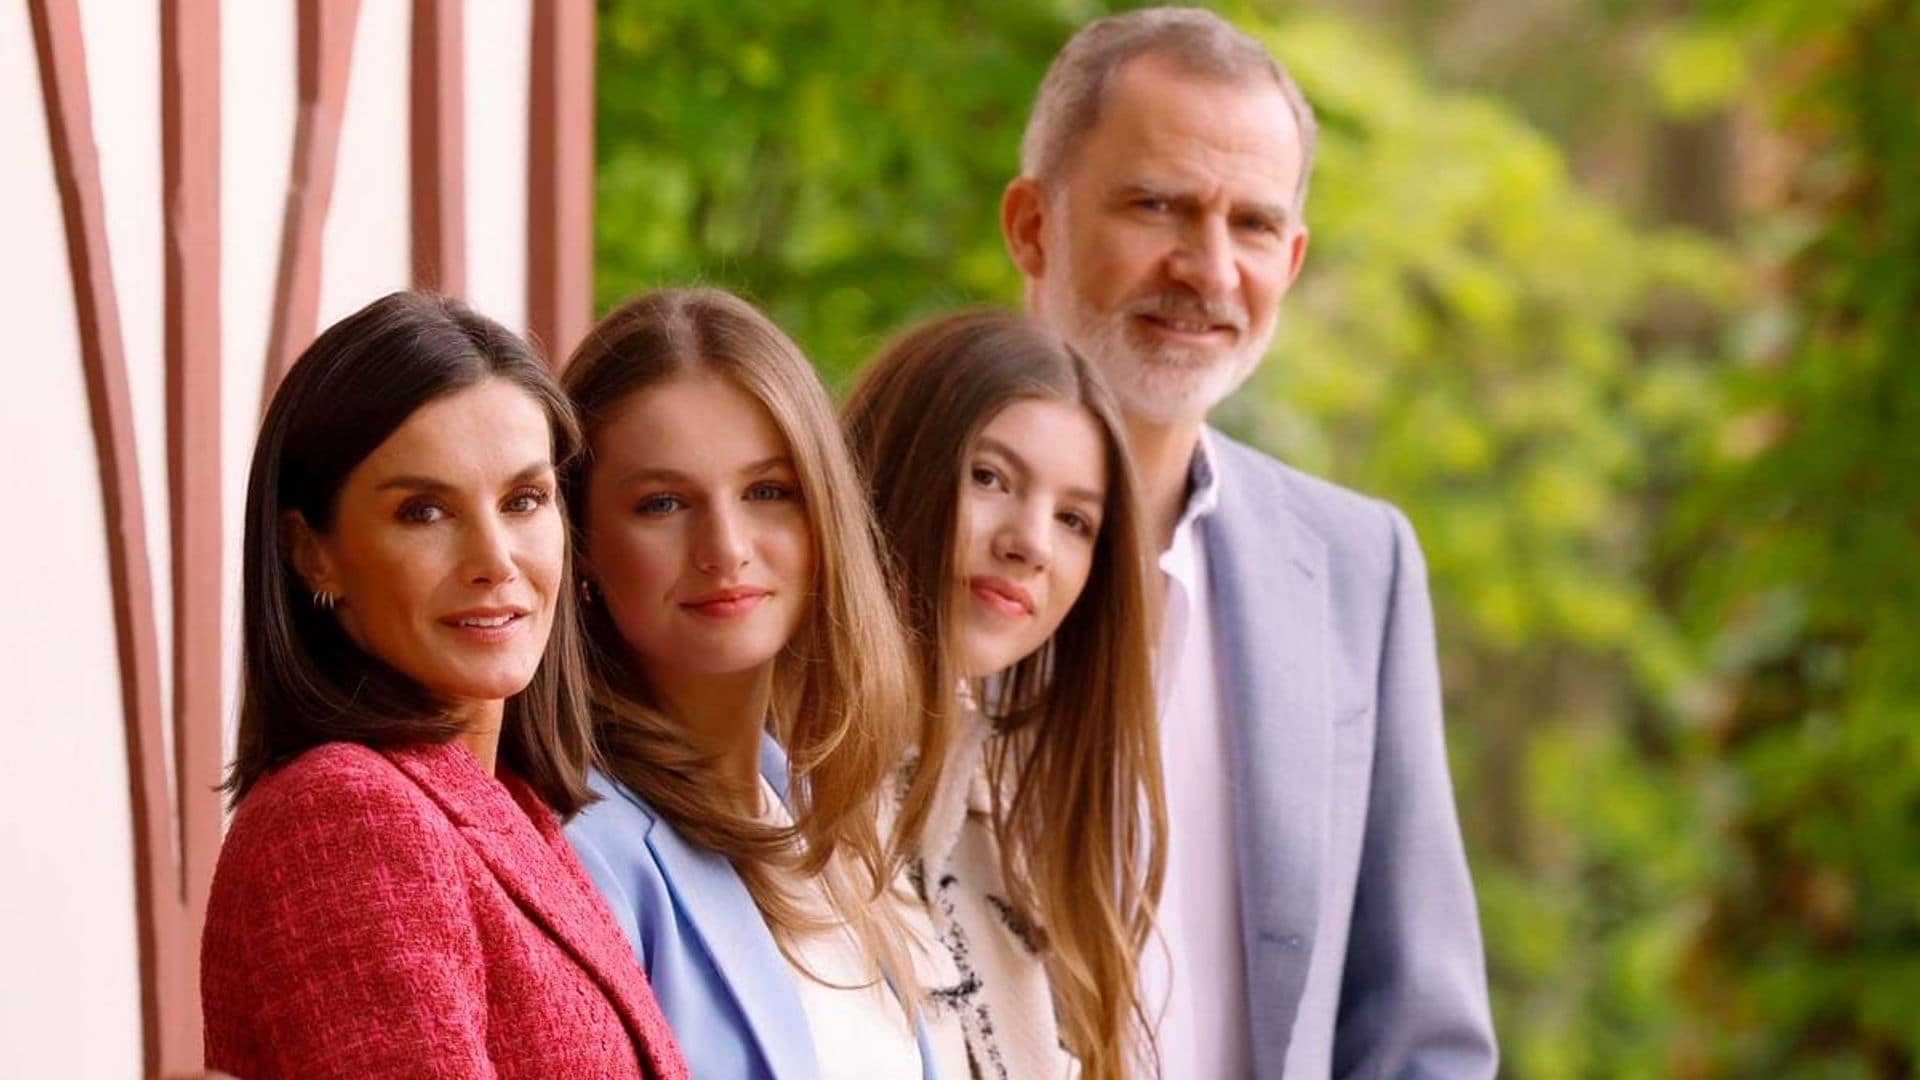 New photos of Spanish royal family released to mark anniversary